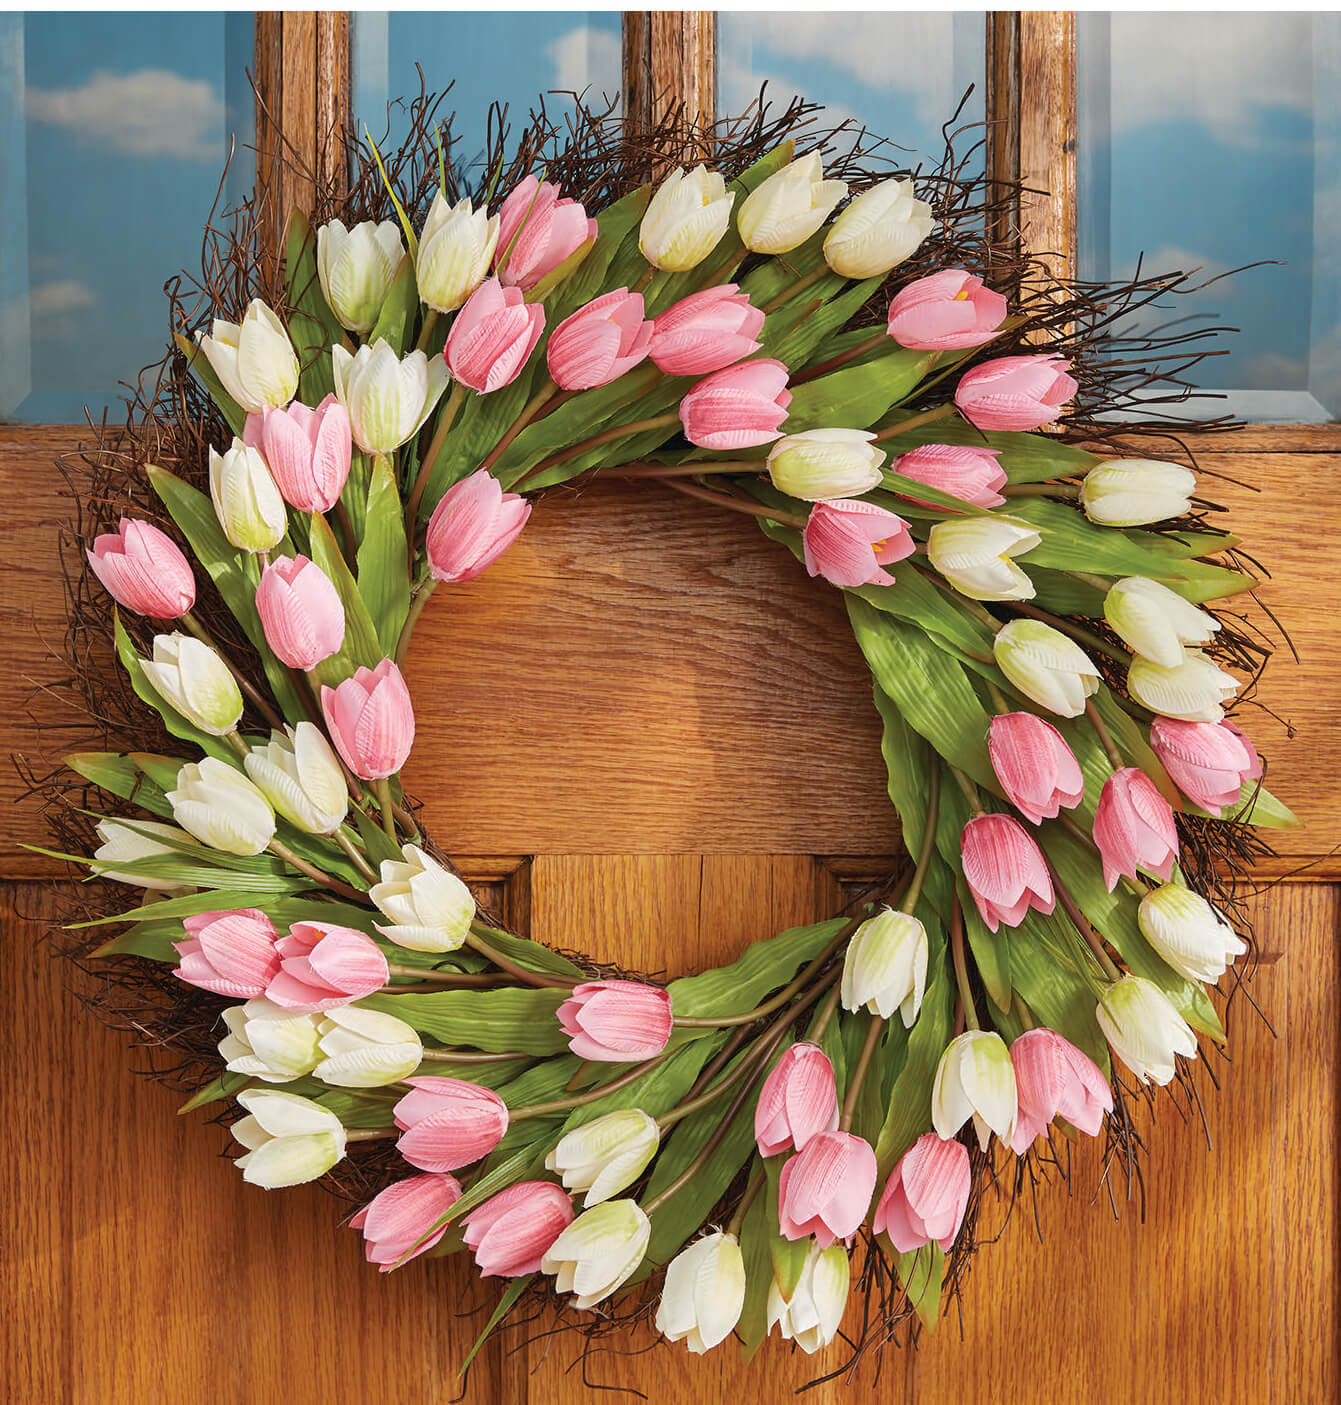 A round twig wreath of many pink and white tulips hung on an oak door with paned windows.